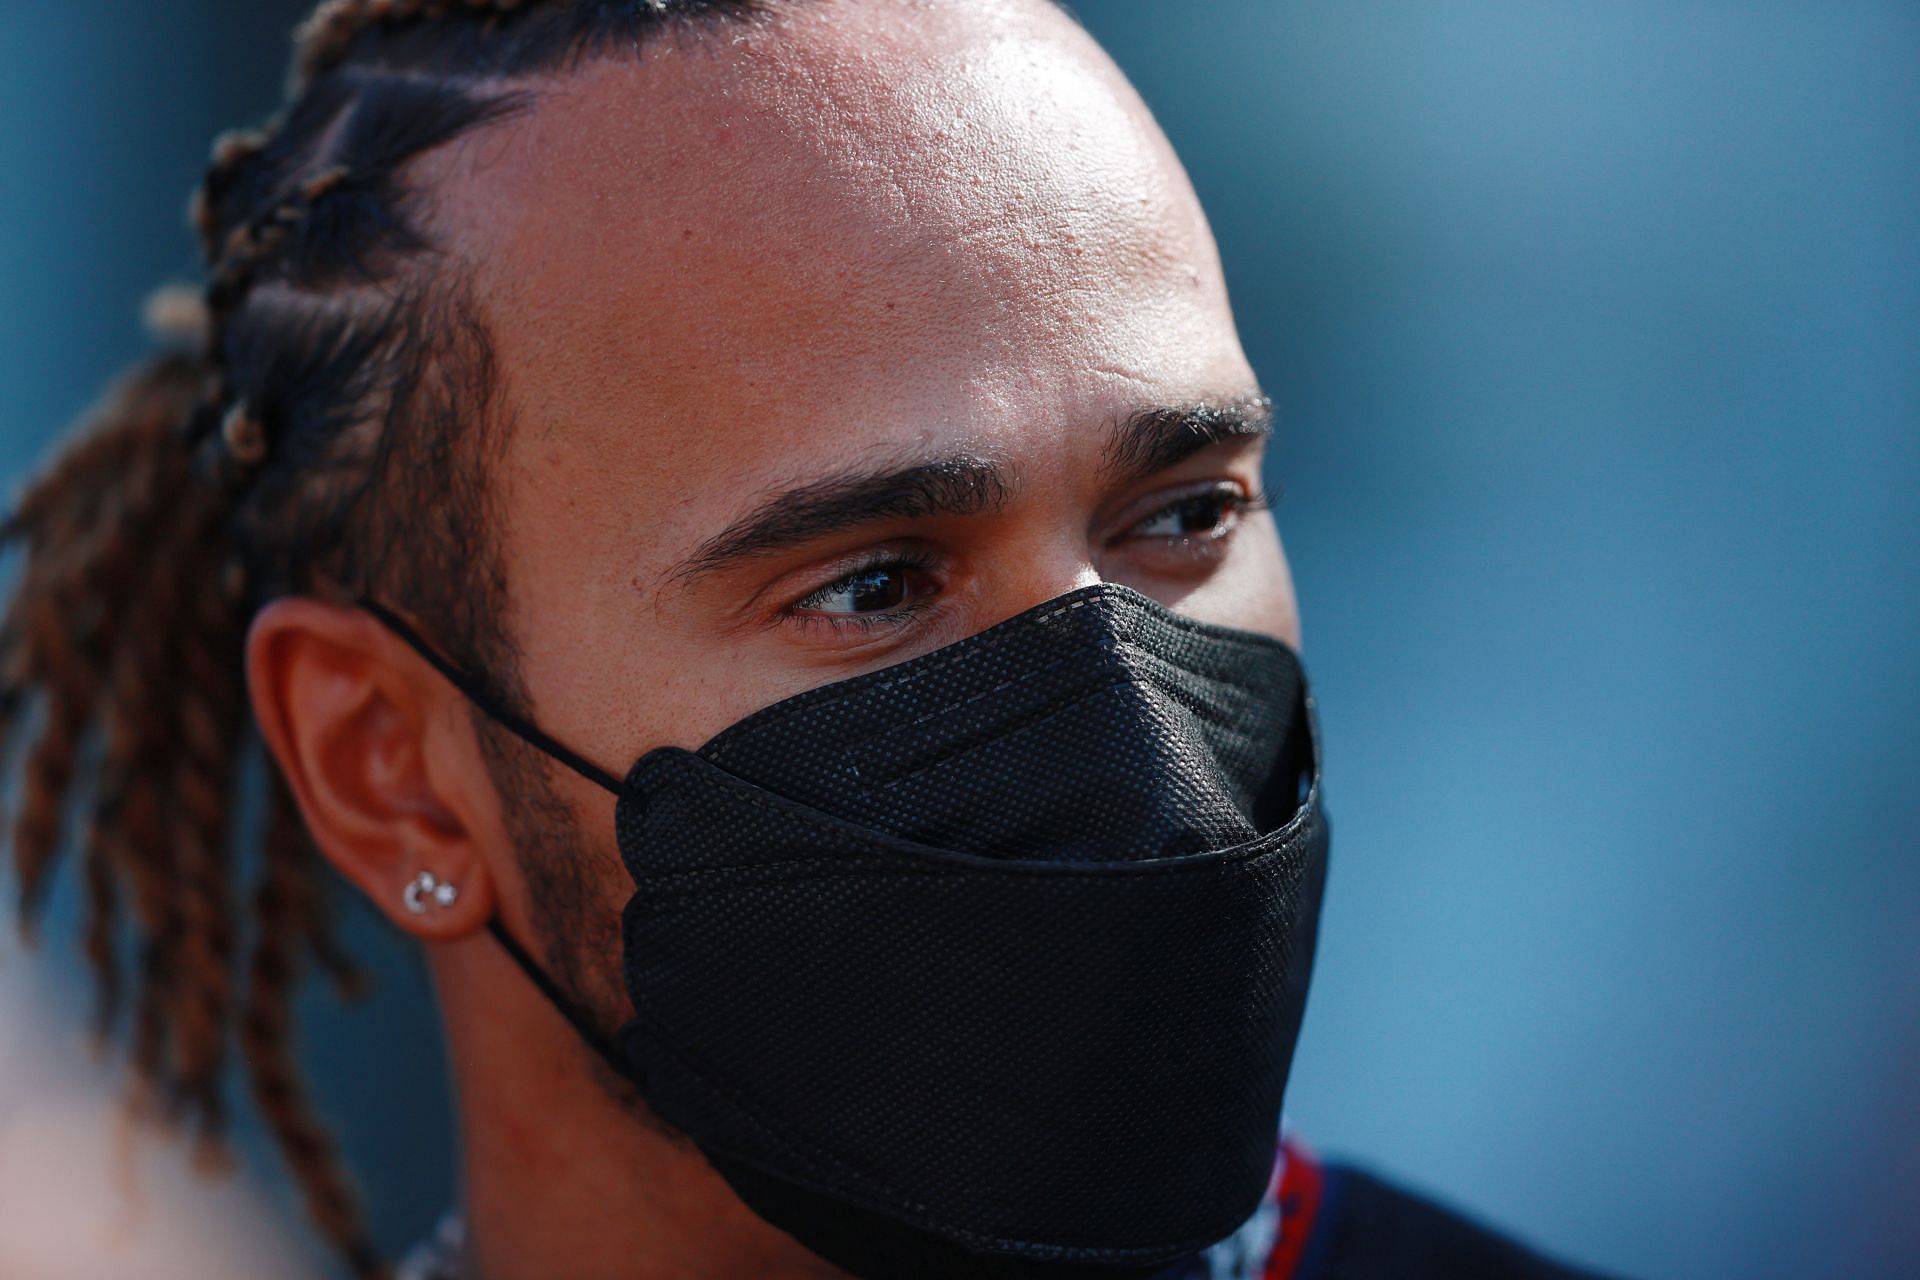 Lewis Hamilton in the F1 paddock. (Photo by Mark Thompson/Getty Images)